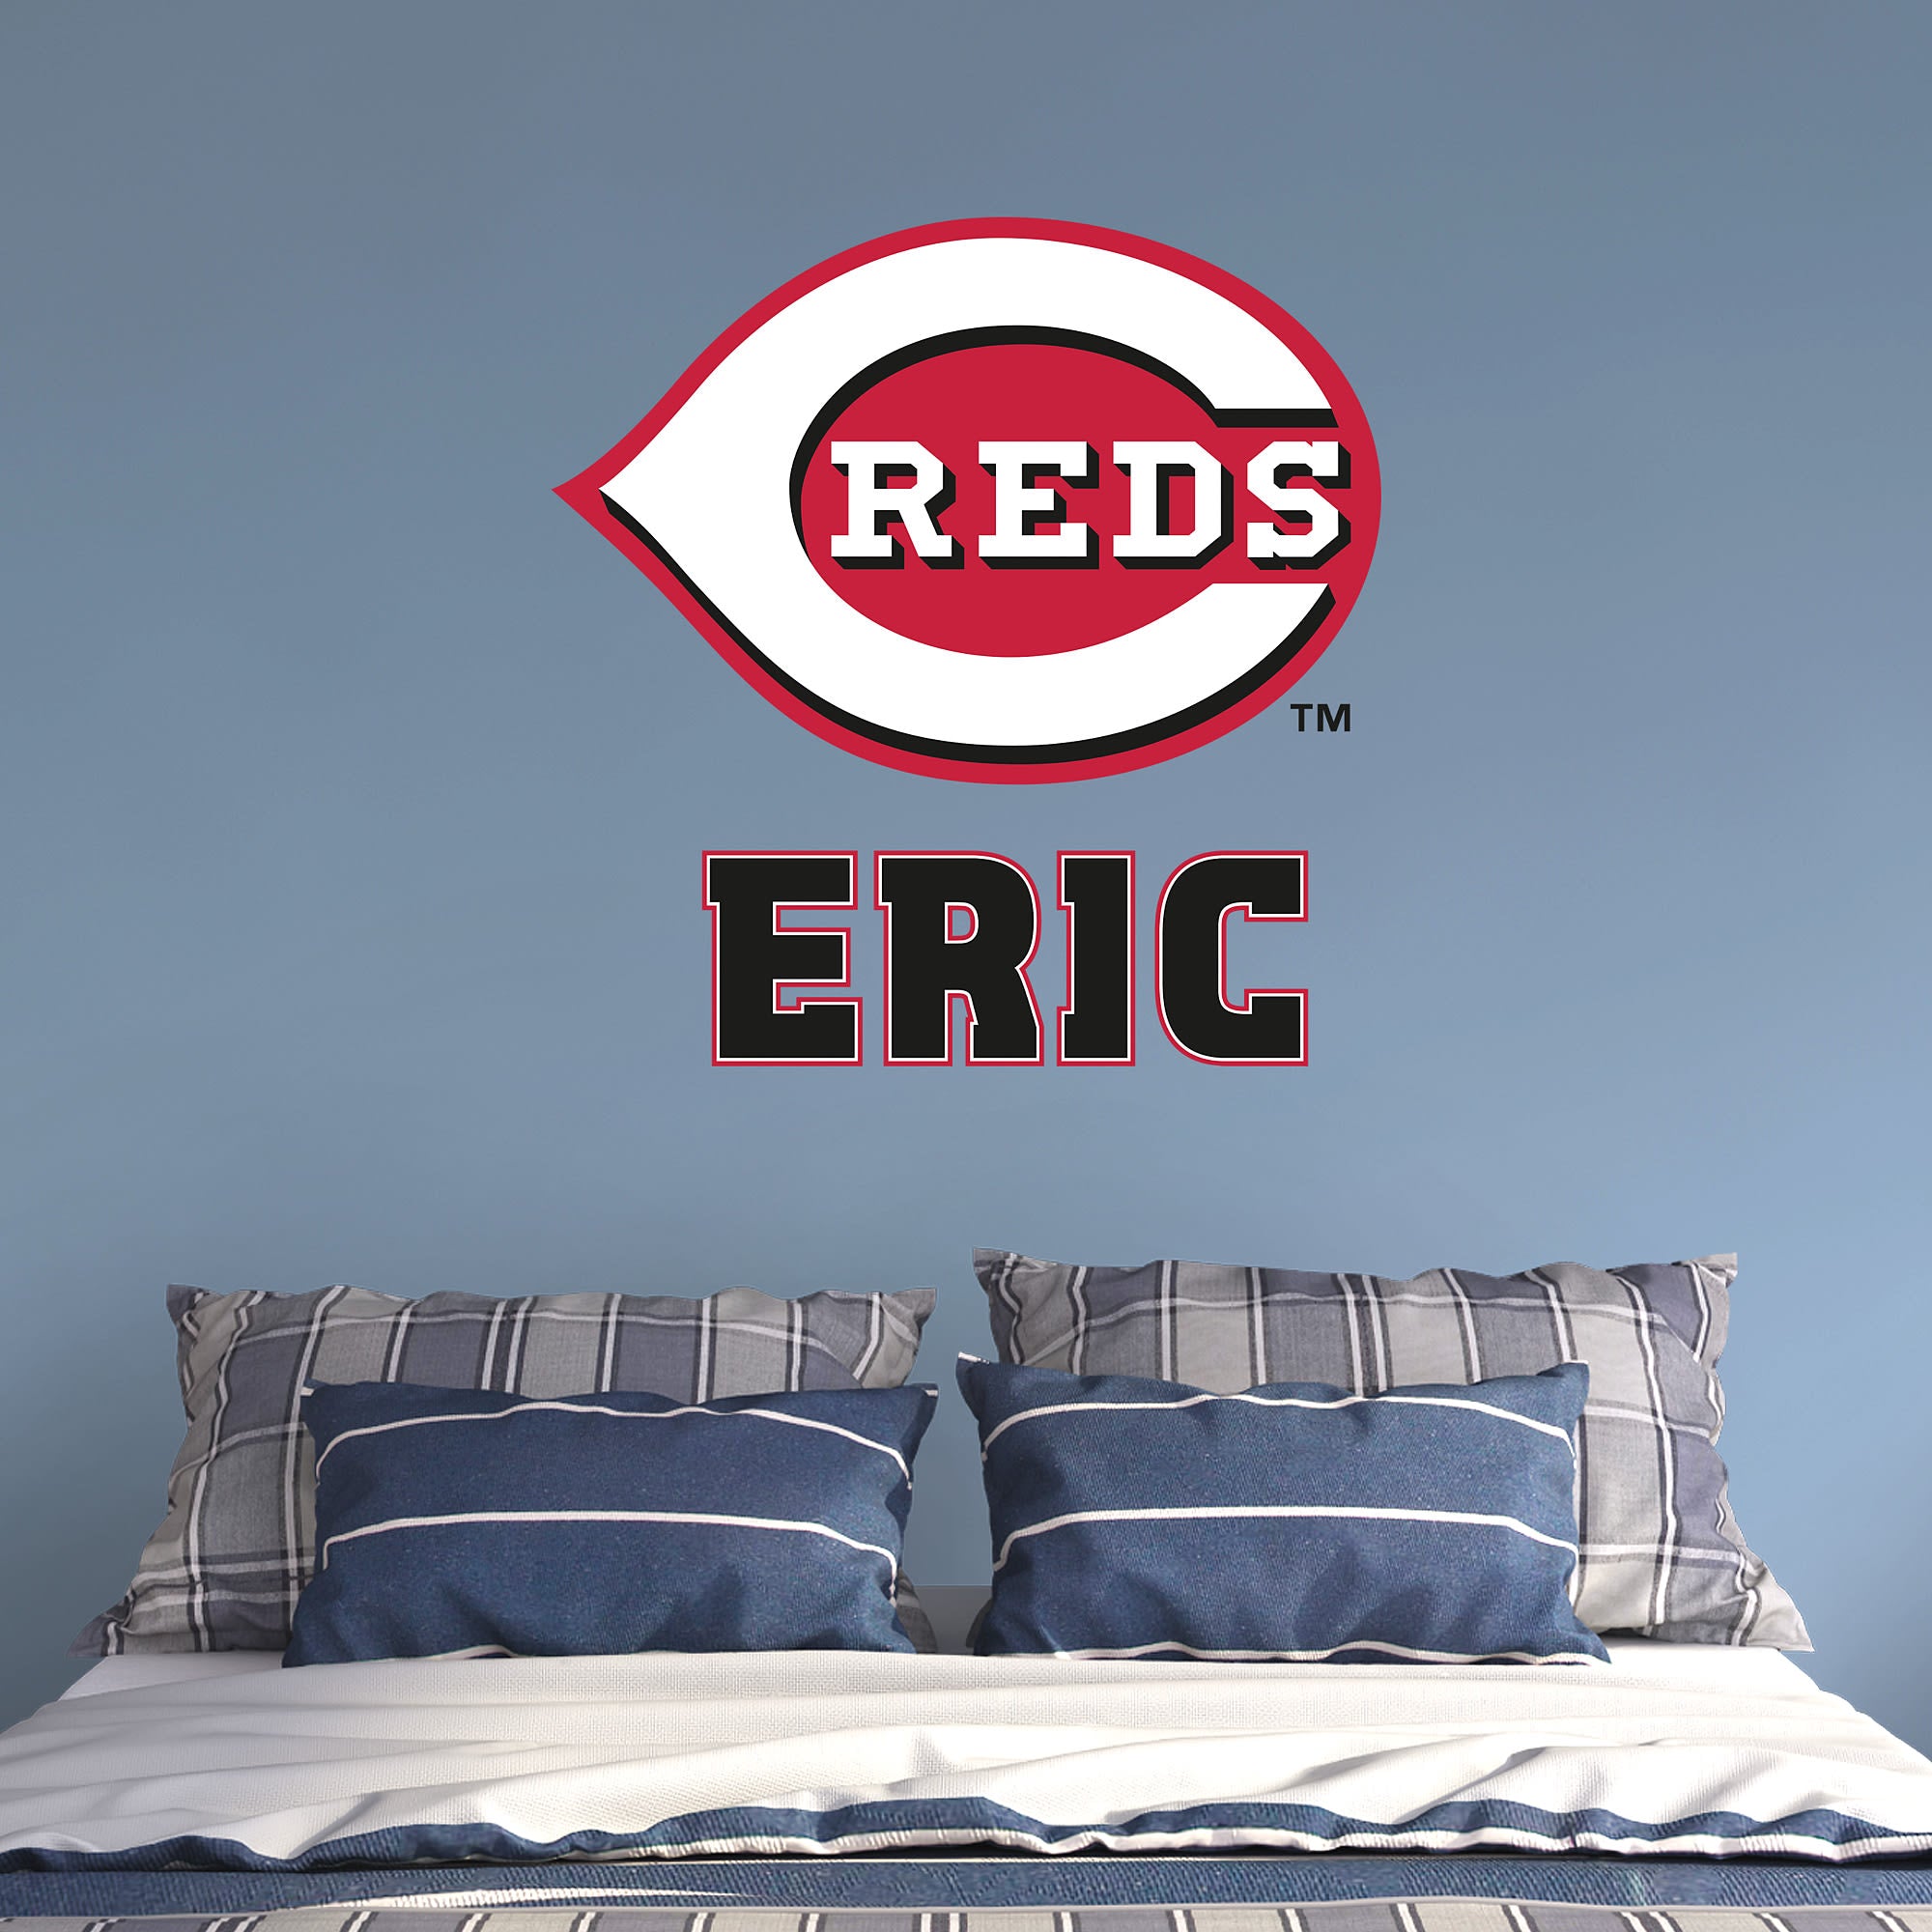 Cincinnati Reds: Stacked Personalized Name - Officially Licensed MLB Transfer Decal in Black (52"W x 39.5"H) by Fathead | Vinyl